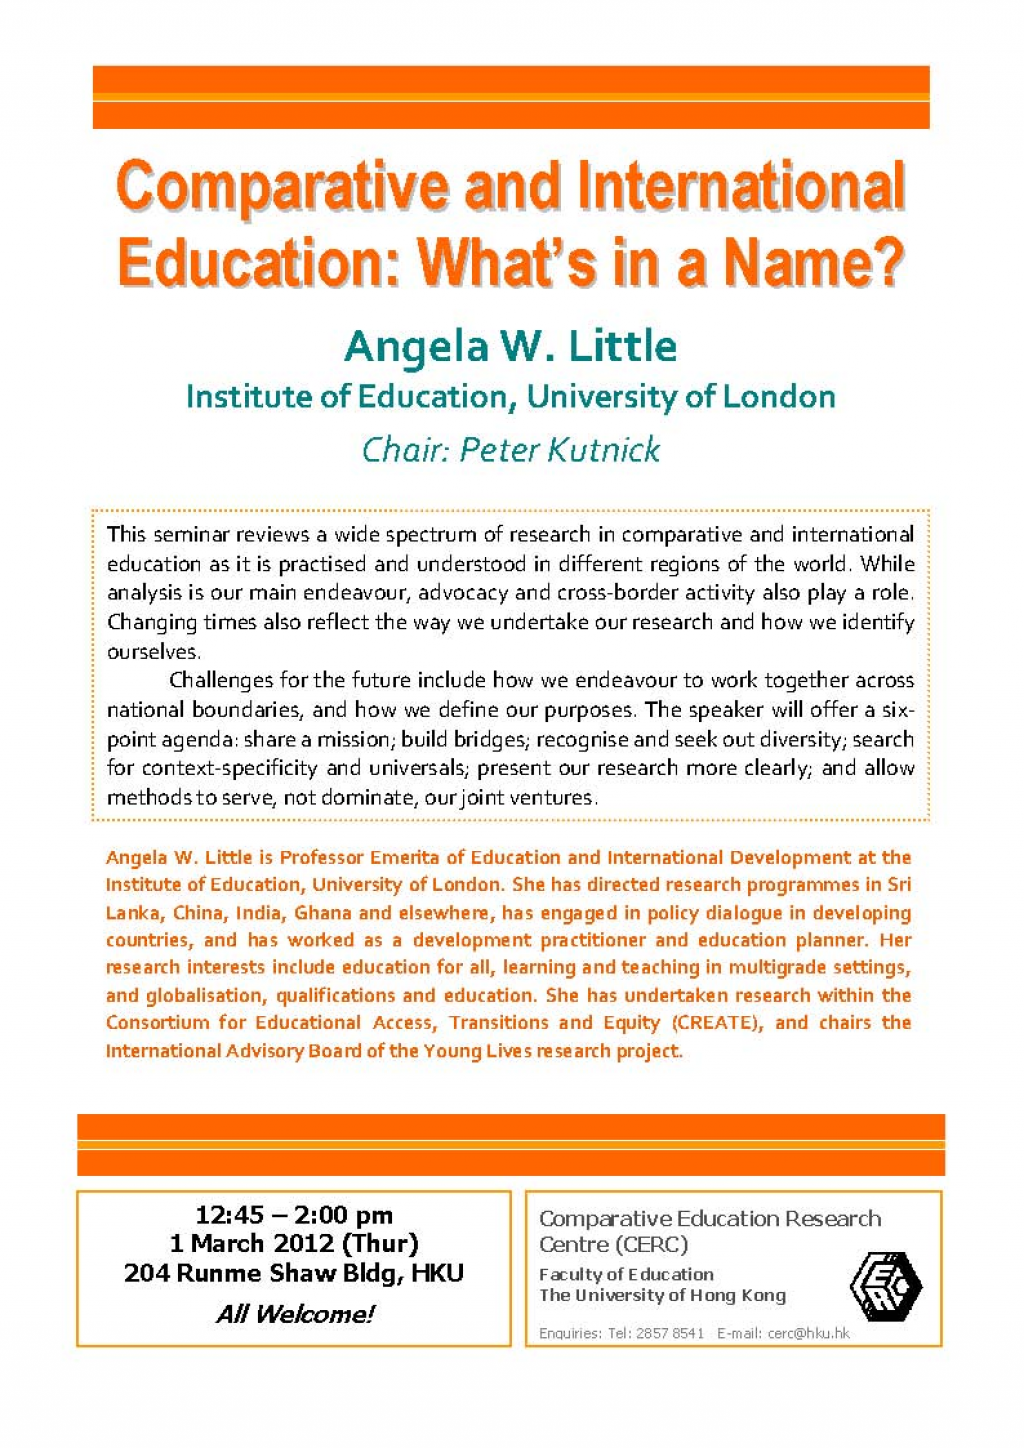 Seminar - Comparative and International Education: What’s in a Name?